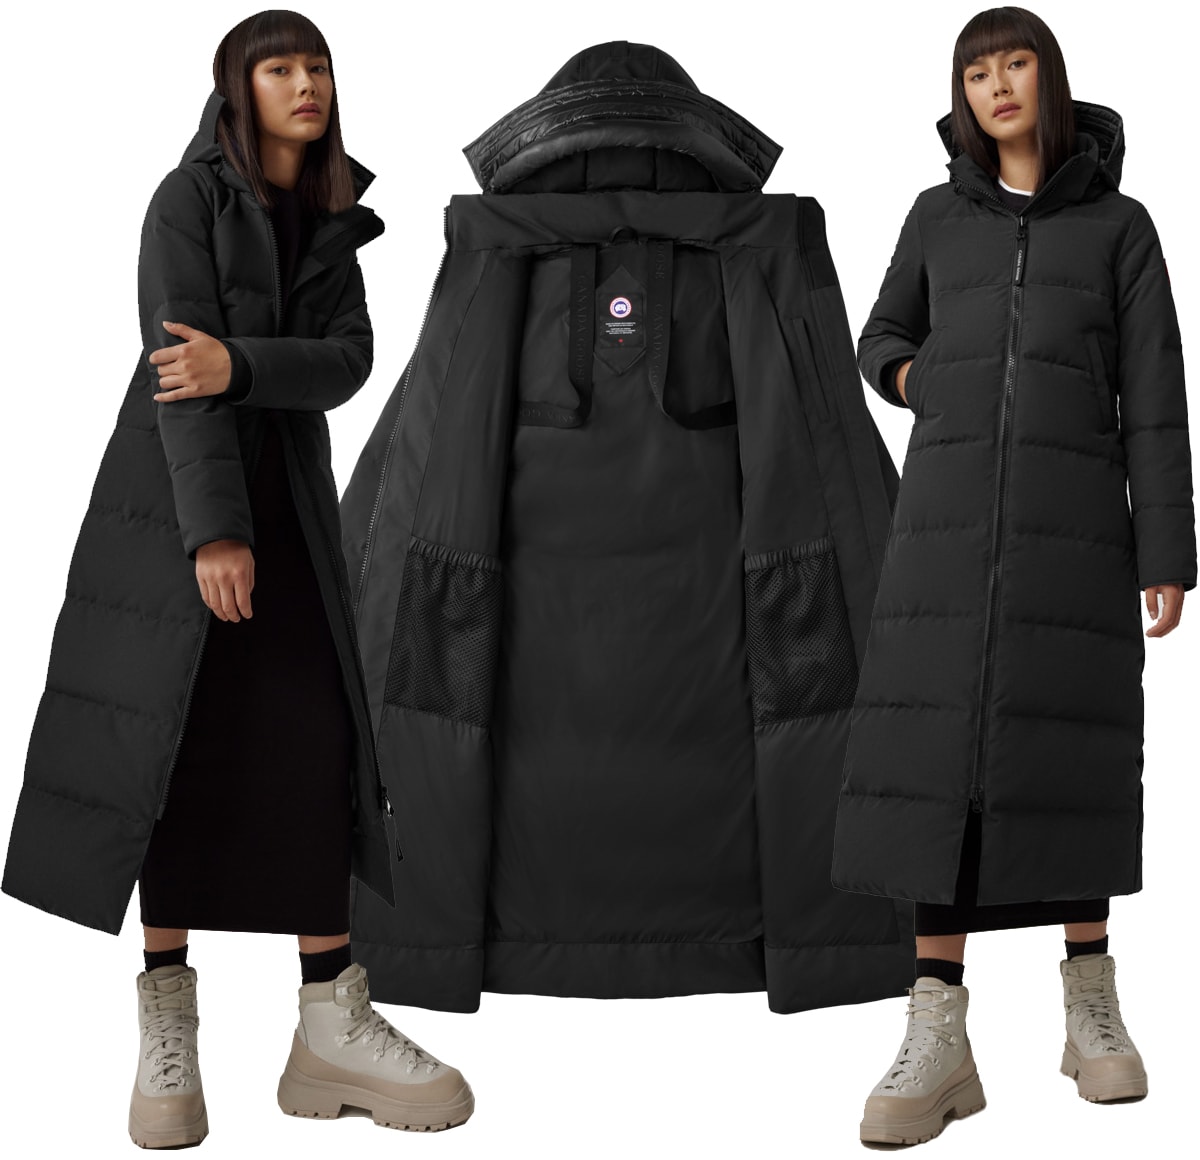 The Mystique Parka has a streamlined hood and a modern feminine silhouette with an elaborate quilt-through design that promotes even heat distribution